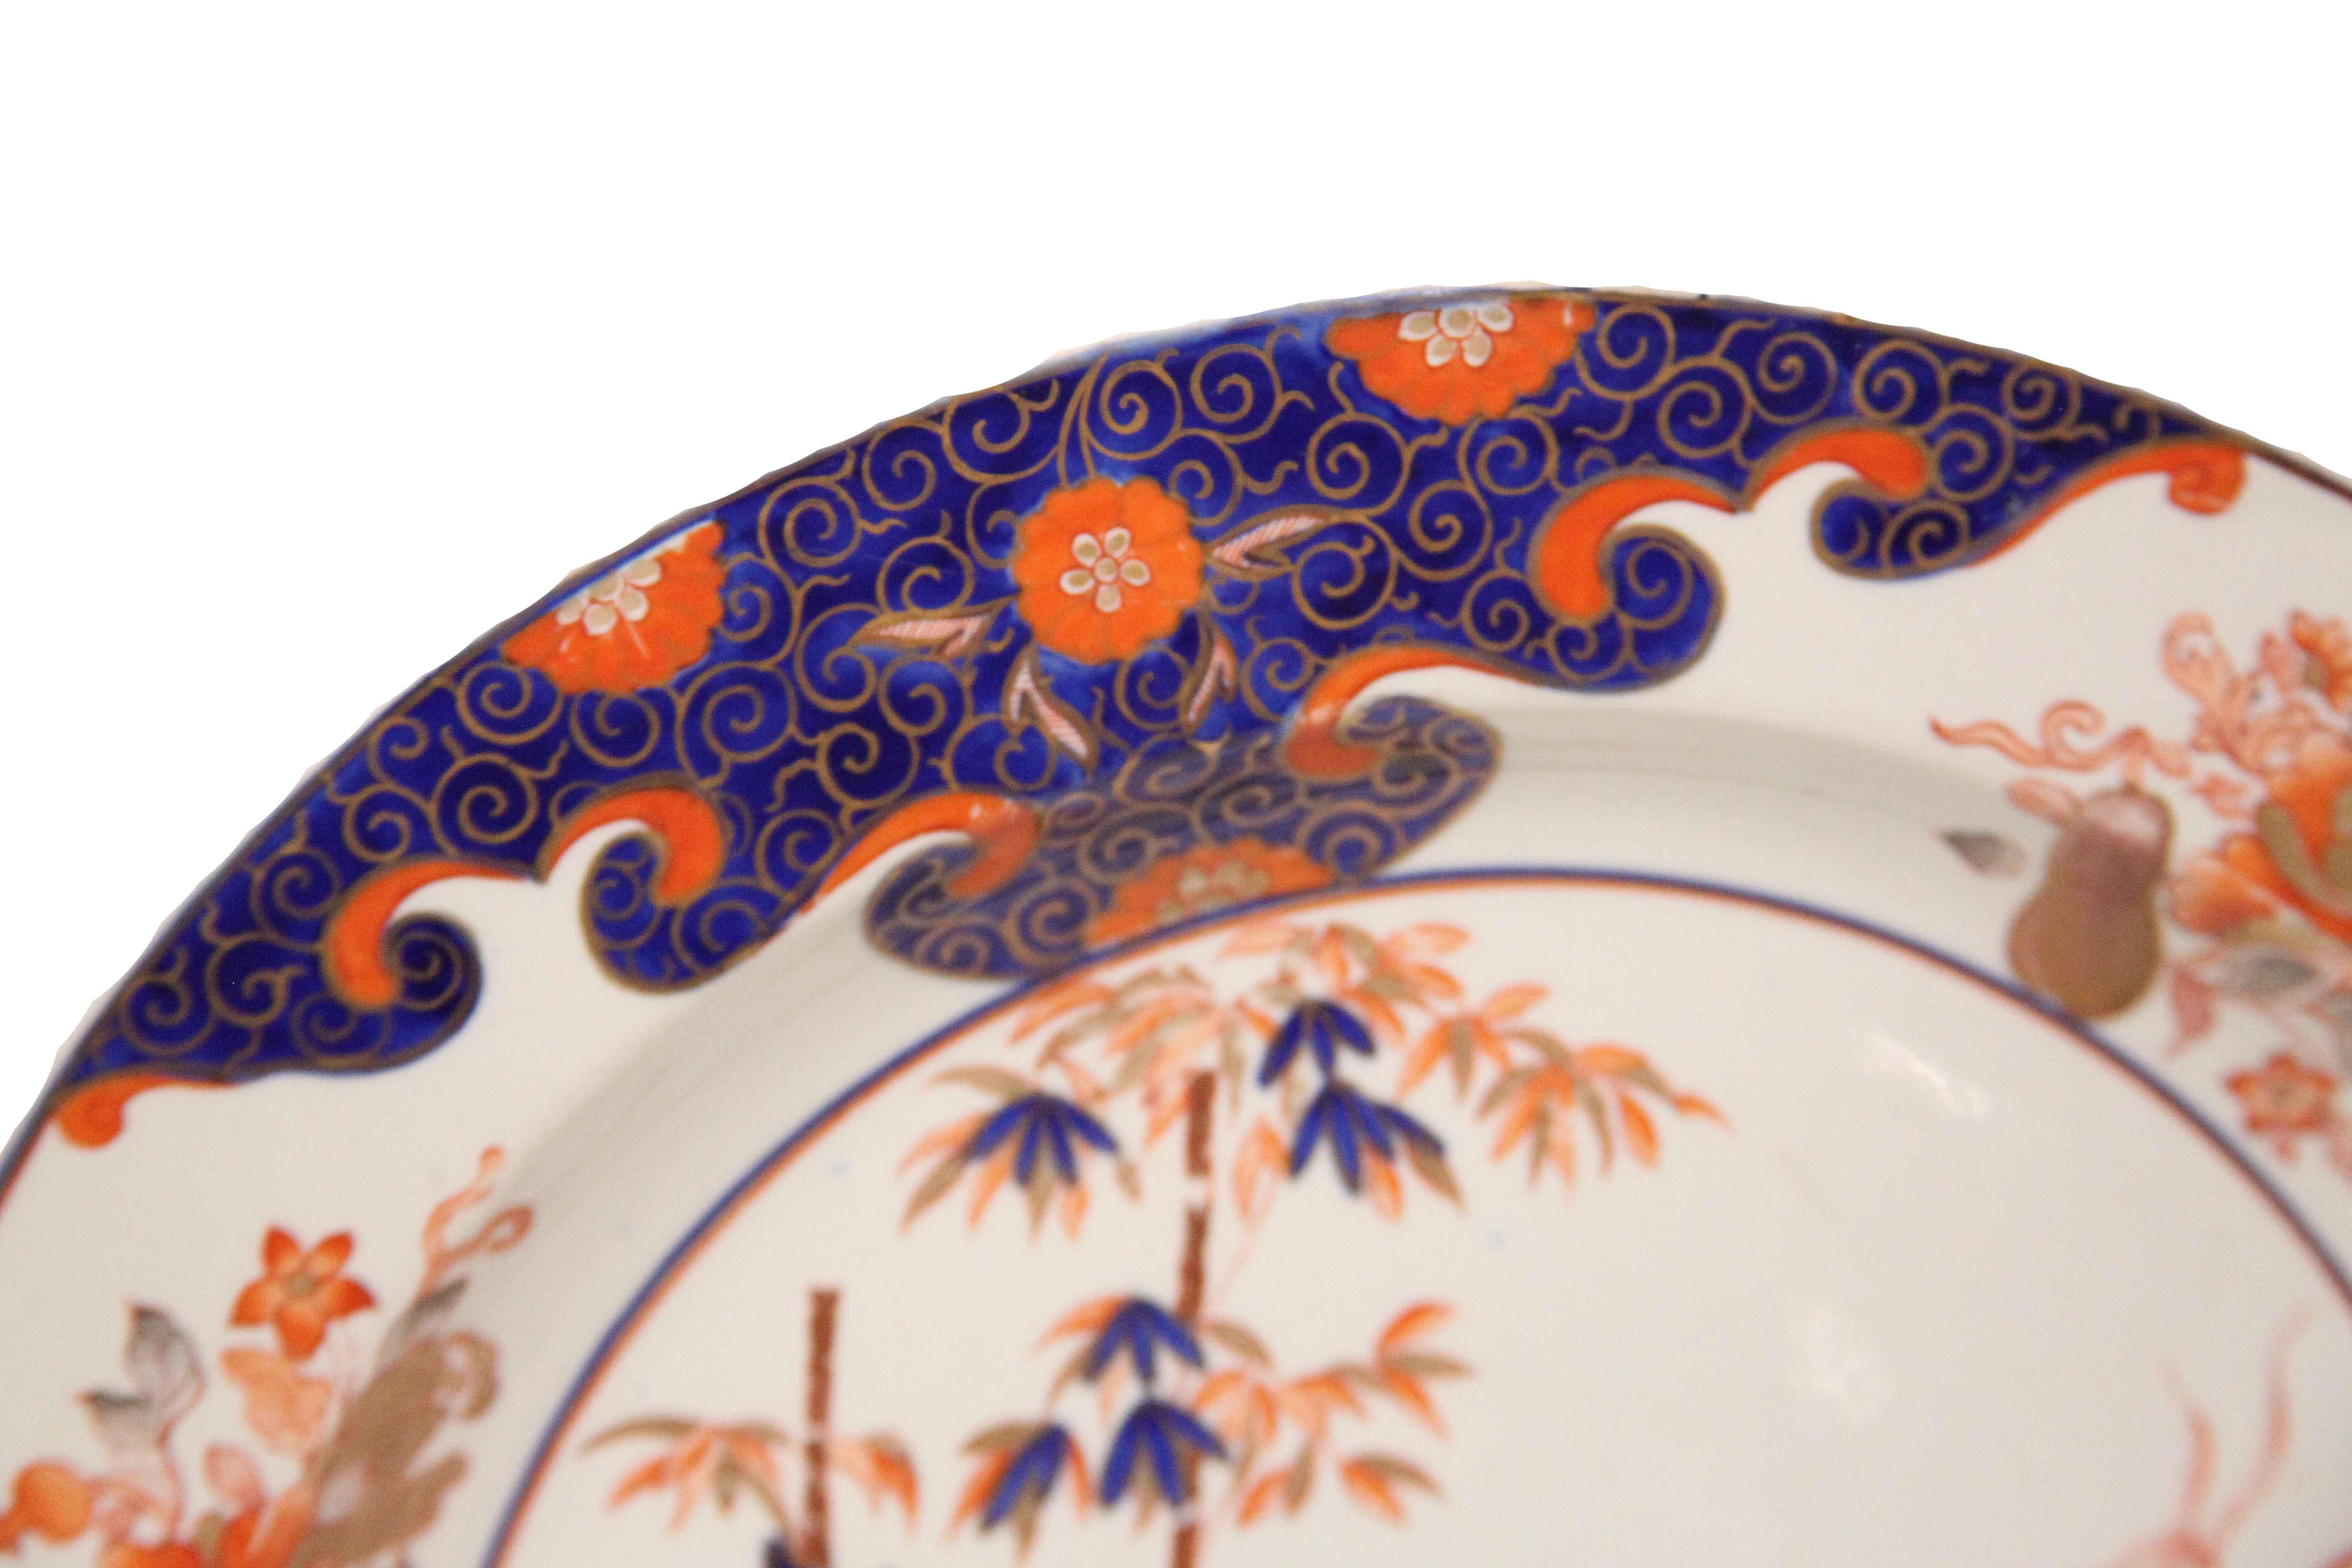 Early 19th century English ironstone charger, the border with a multitude of flowers and foliate on alternating cobalt and ivory backgrounds, the center featuring bamboo, floral and foliate motifs. Photos note minor gilding loss to center flower and